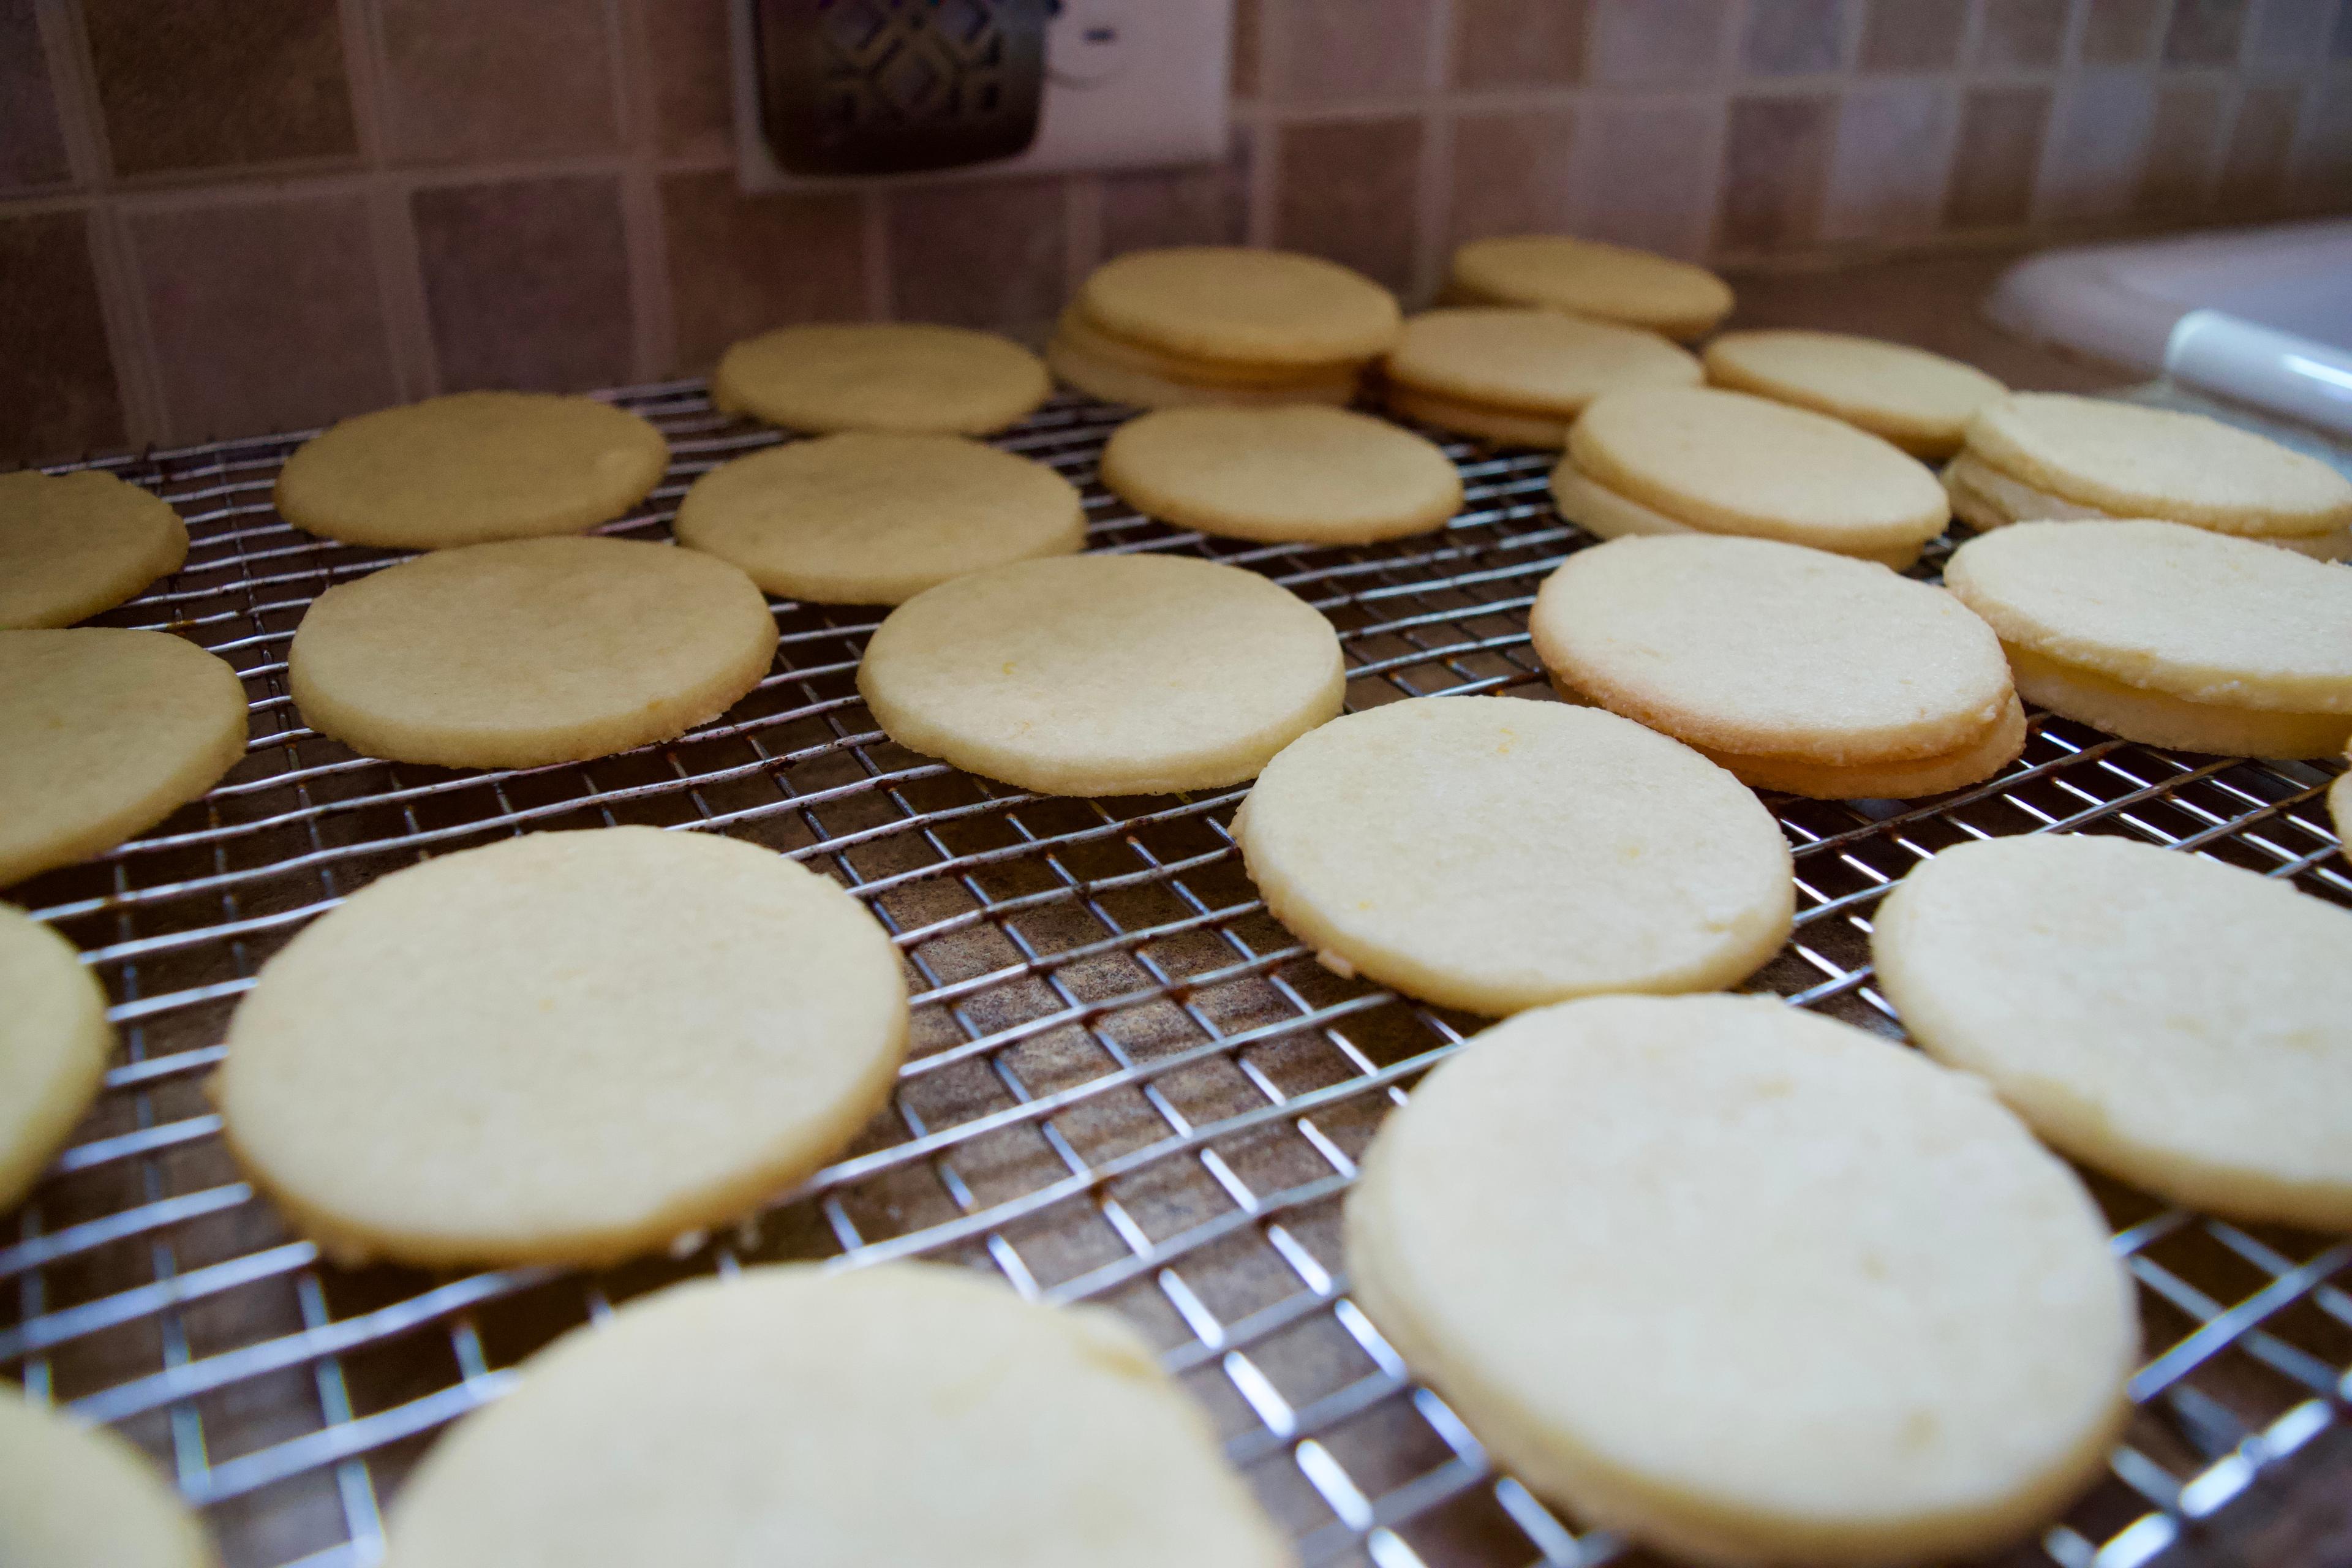 Cookies cooling.